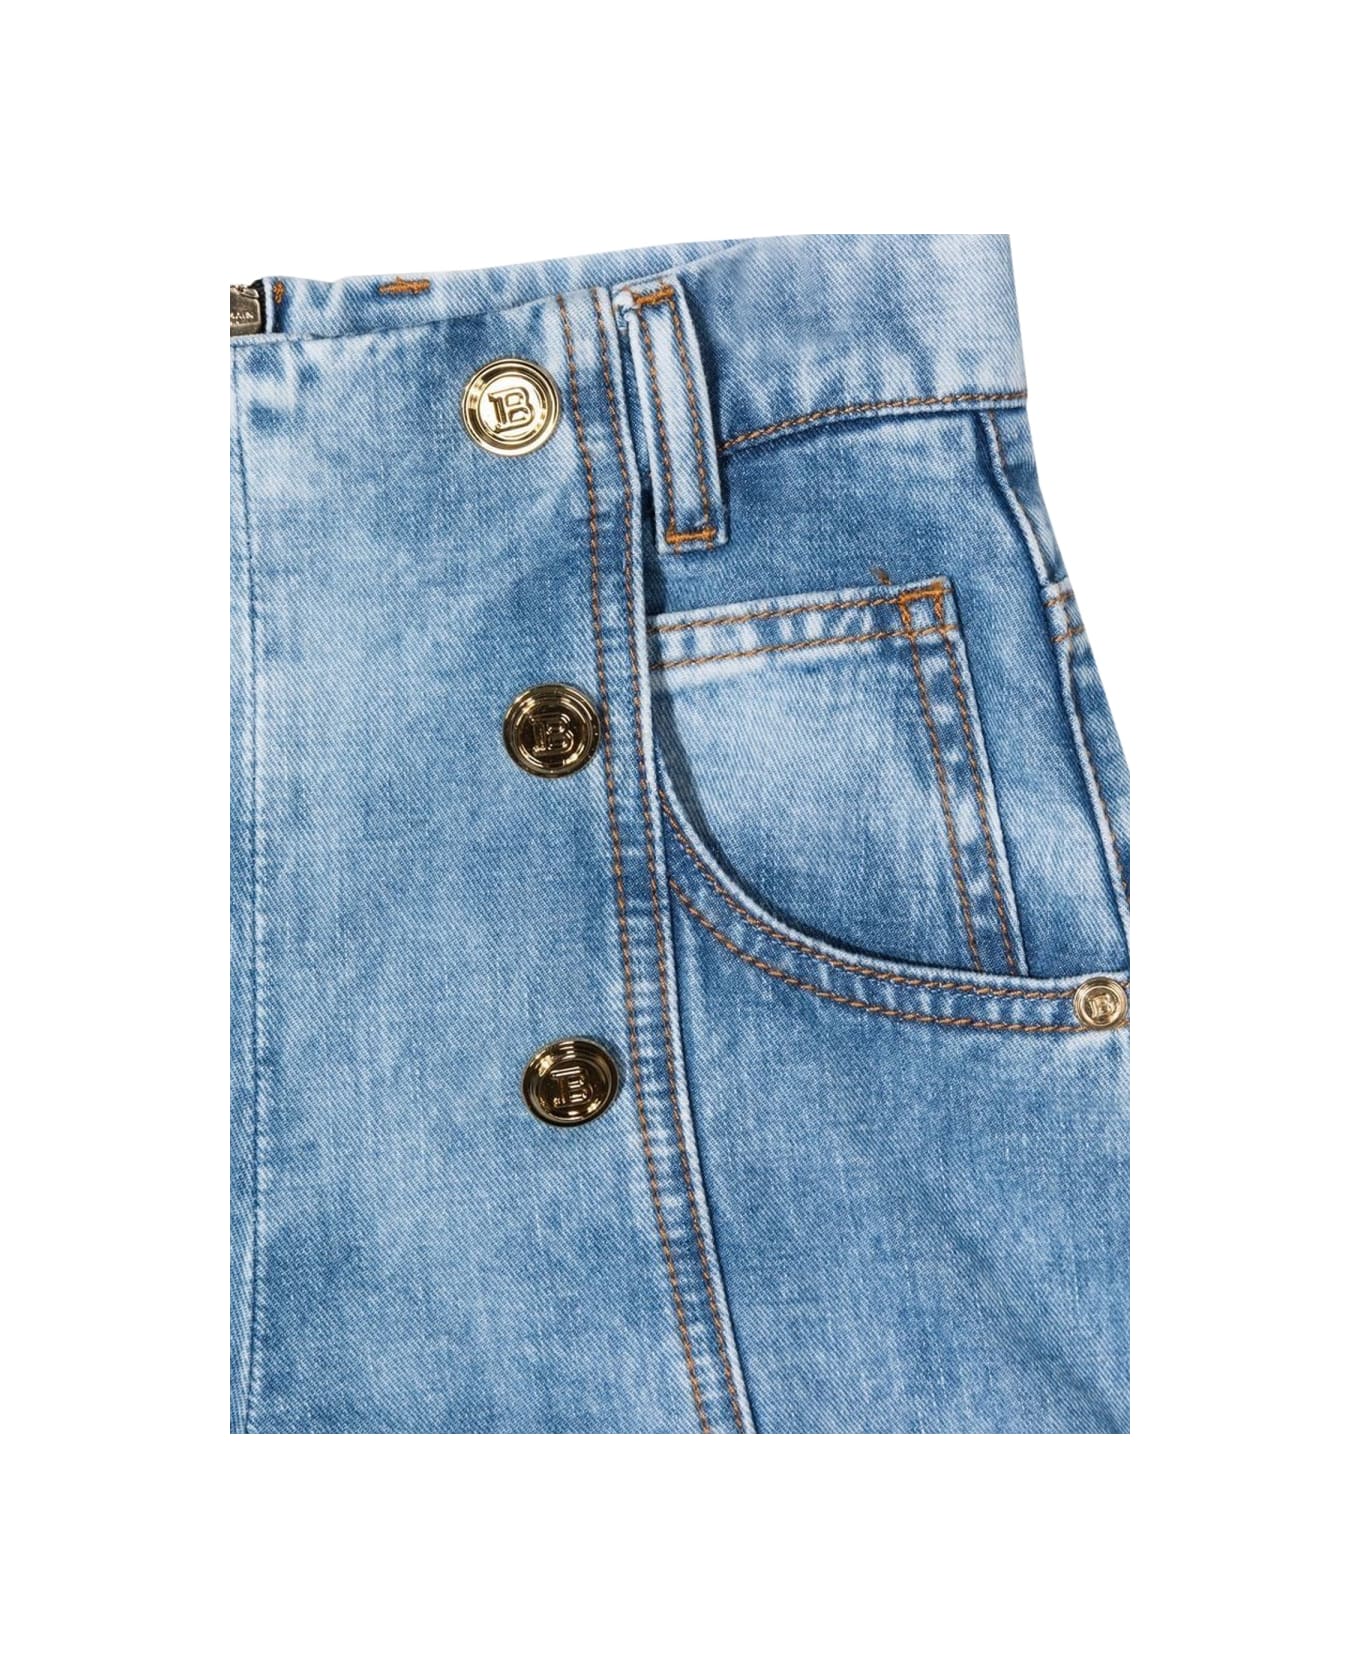 Balmain Short Shorts With Gold Buttons - AZURE ボトムス